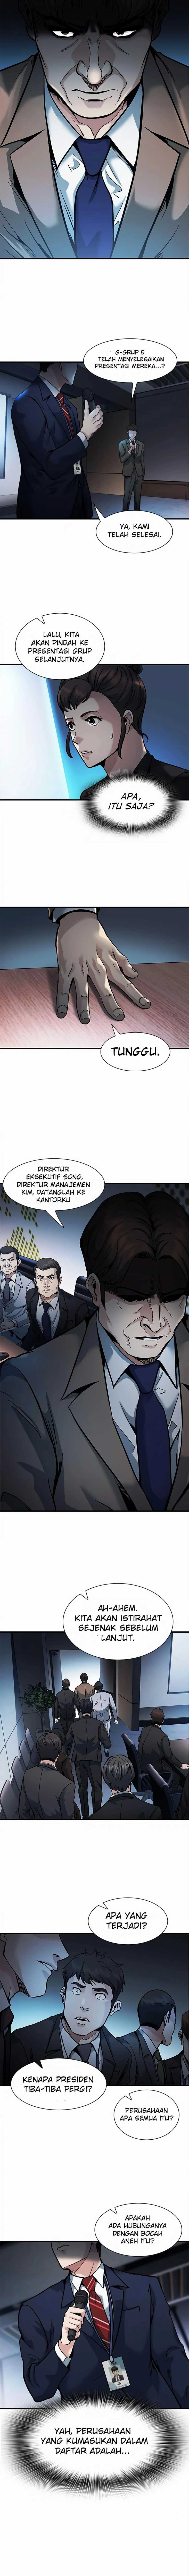 Chairman Kang, The New Employee Chapter 10